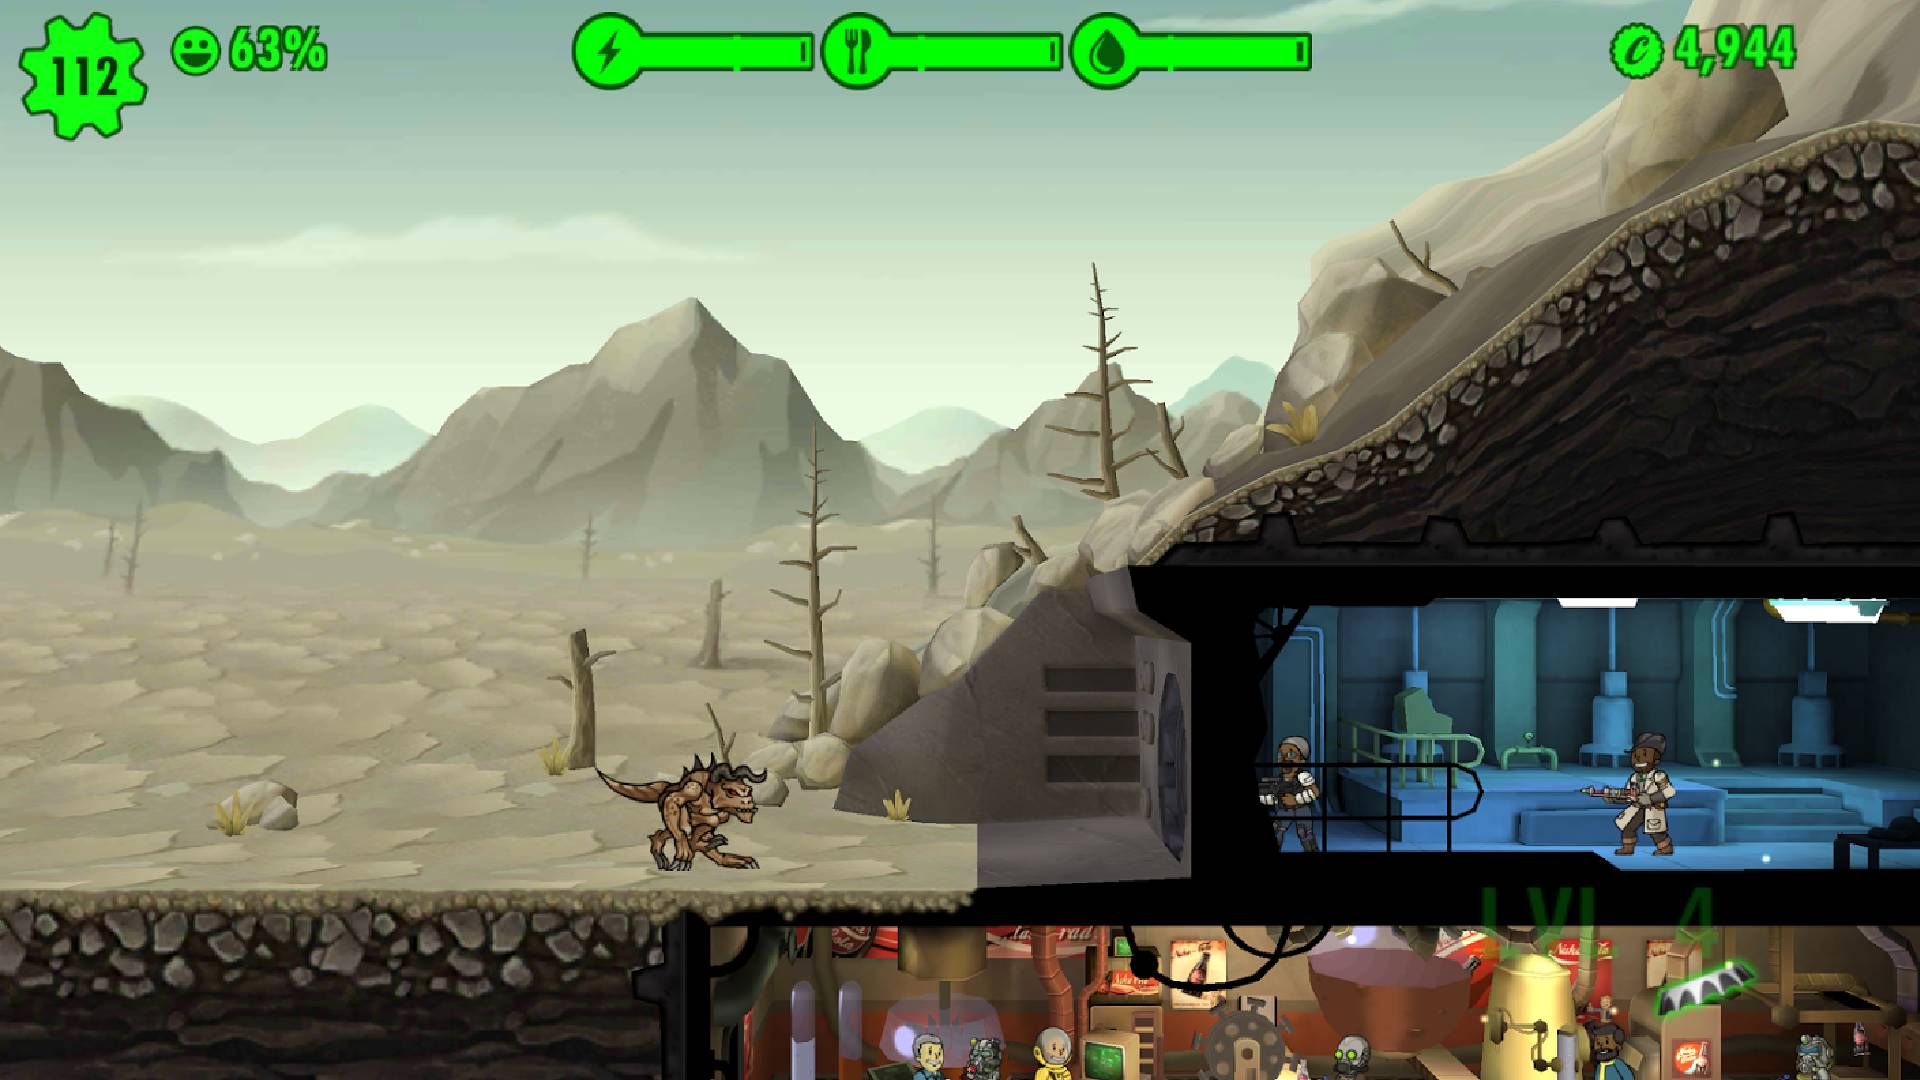 A bunker in the wasteland is shown, with characters on the inside in seperate rooms